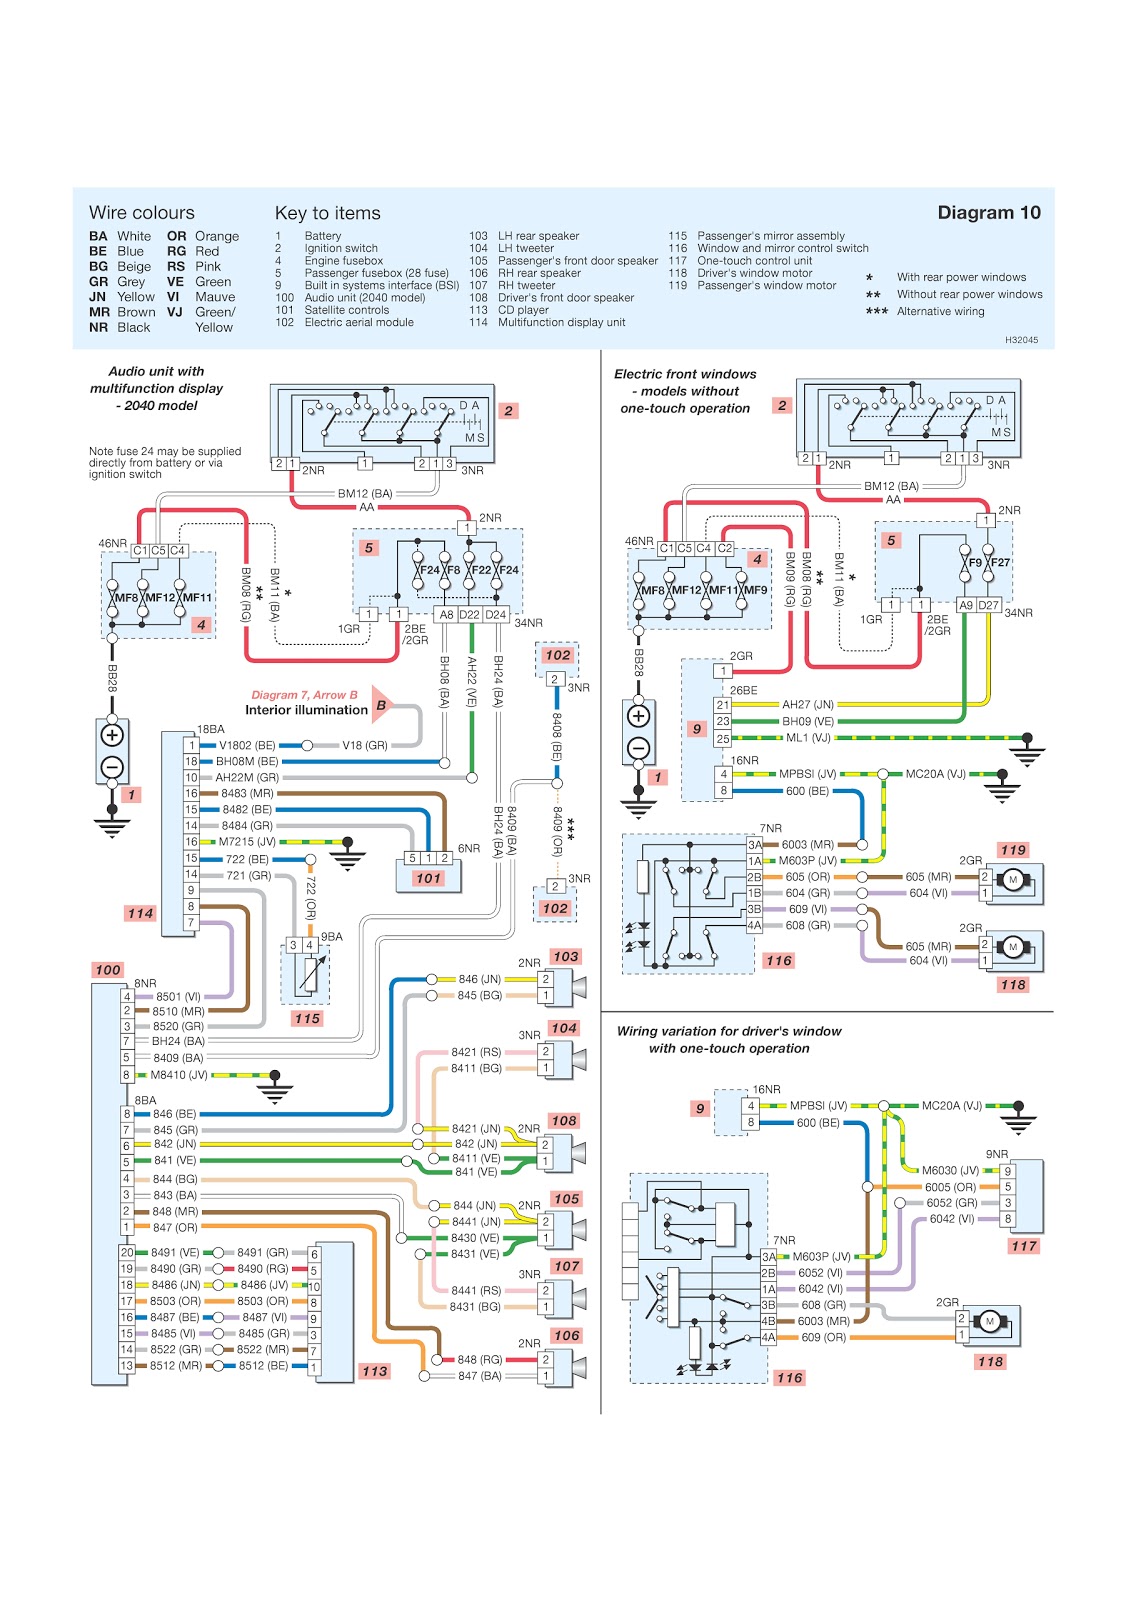 Peugeot 206 Schematic Wiring Diagrams Audio System